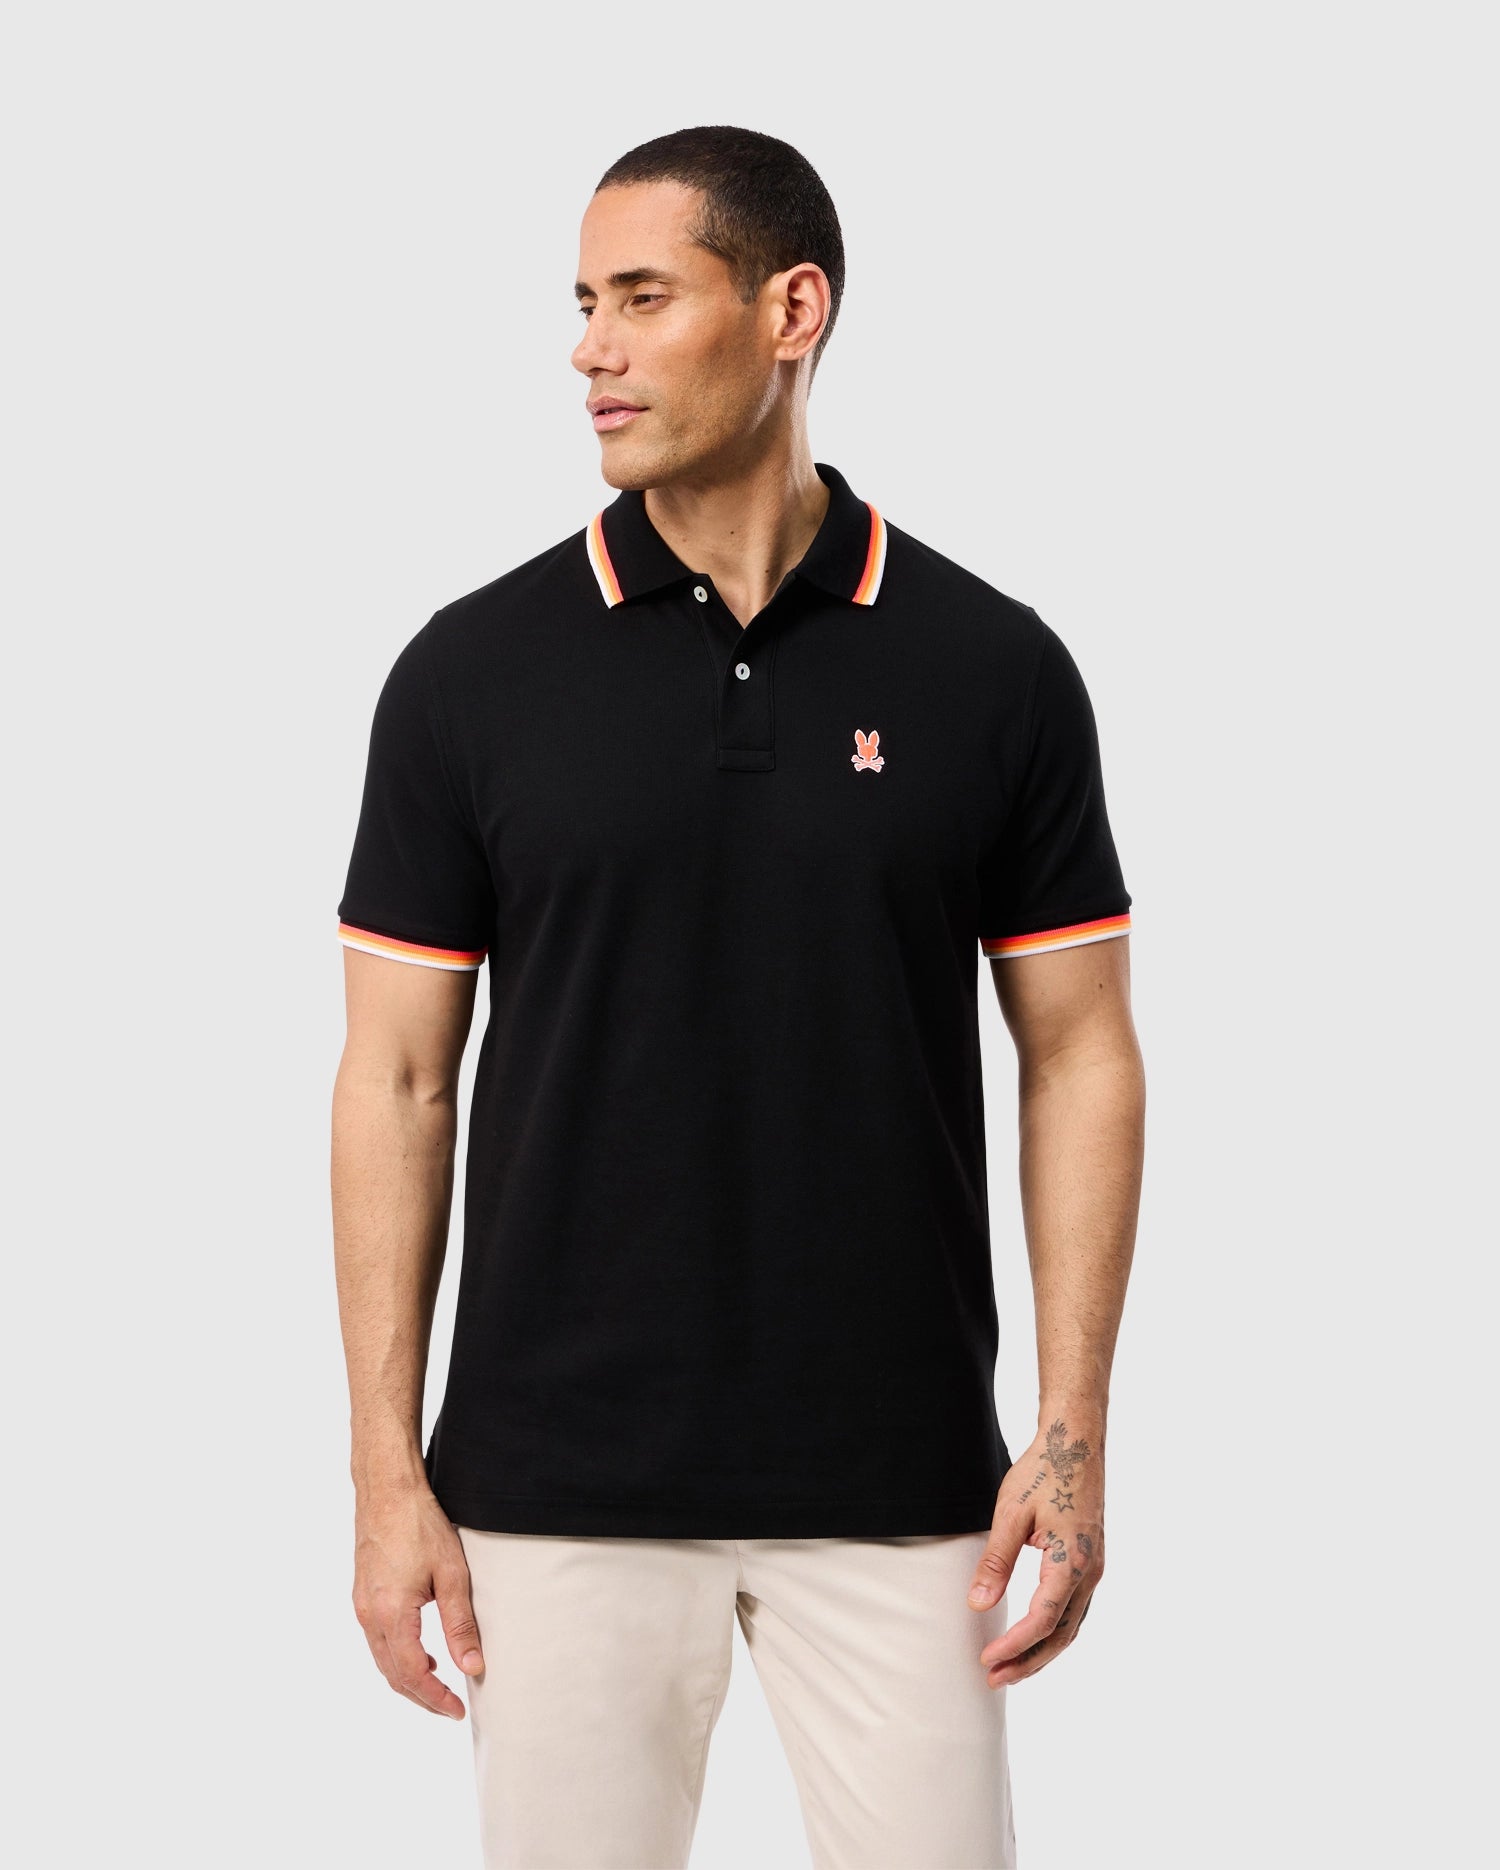 A man wearing a black Psycho Bunny MENS GRANBURY PIQUE POLO - B6K400C200 with red and white trim on the rib knit collar and cuffs stands against a plain gray background. The shirt, made from diamond-knit Pima cotton piqué, features a red embroidered logo on the left chest. He has short hair and is looking to his left while keeping his hands at his sides.